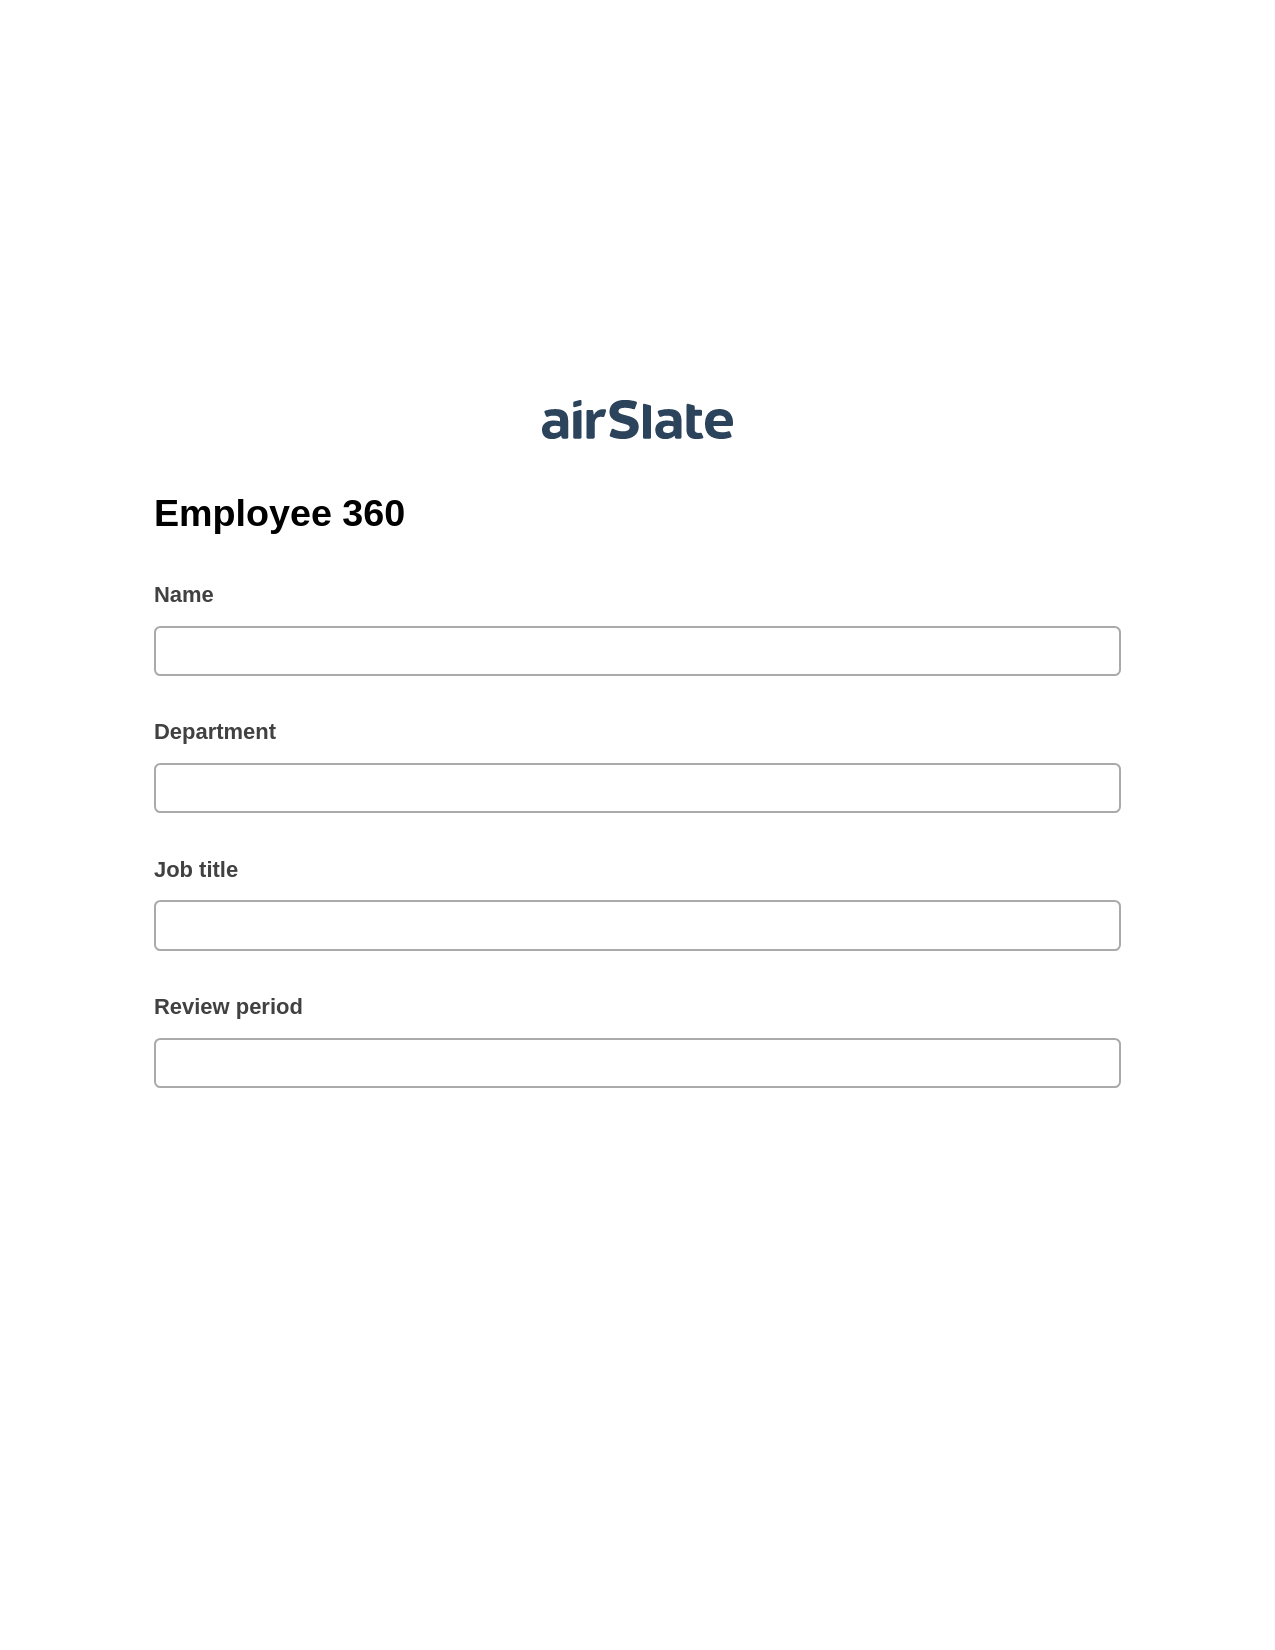 Multirole Employee 360 Pre-fill from Salesforce Records with SOQL Bot, Create QuickBooks Invoice Bot, Archive to Google Drive Bot